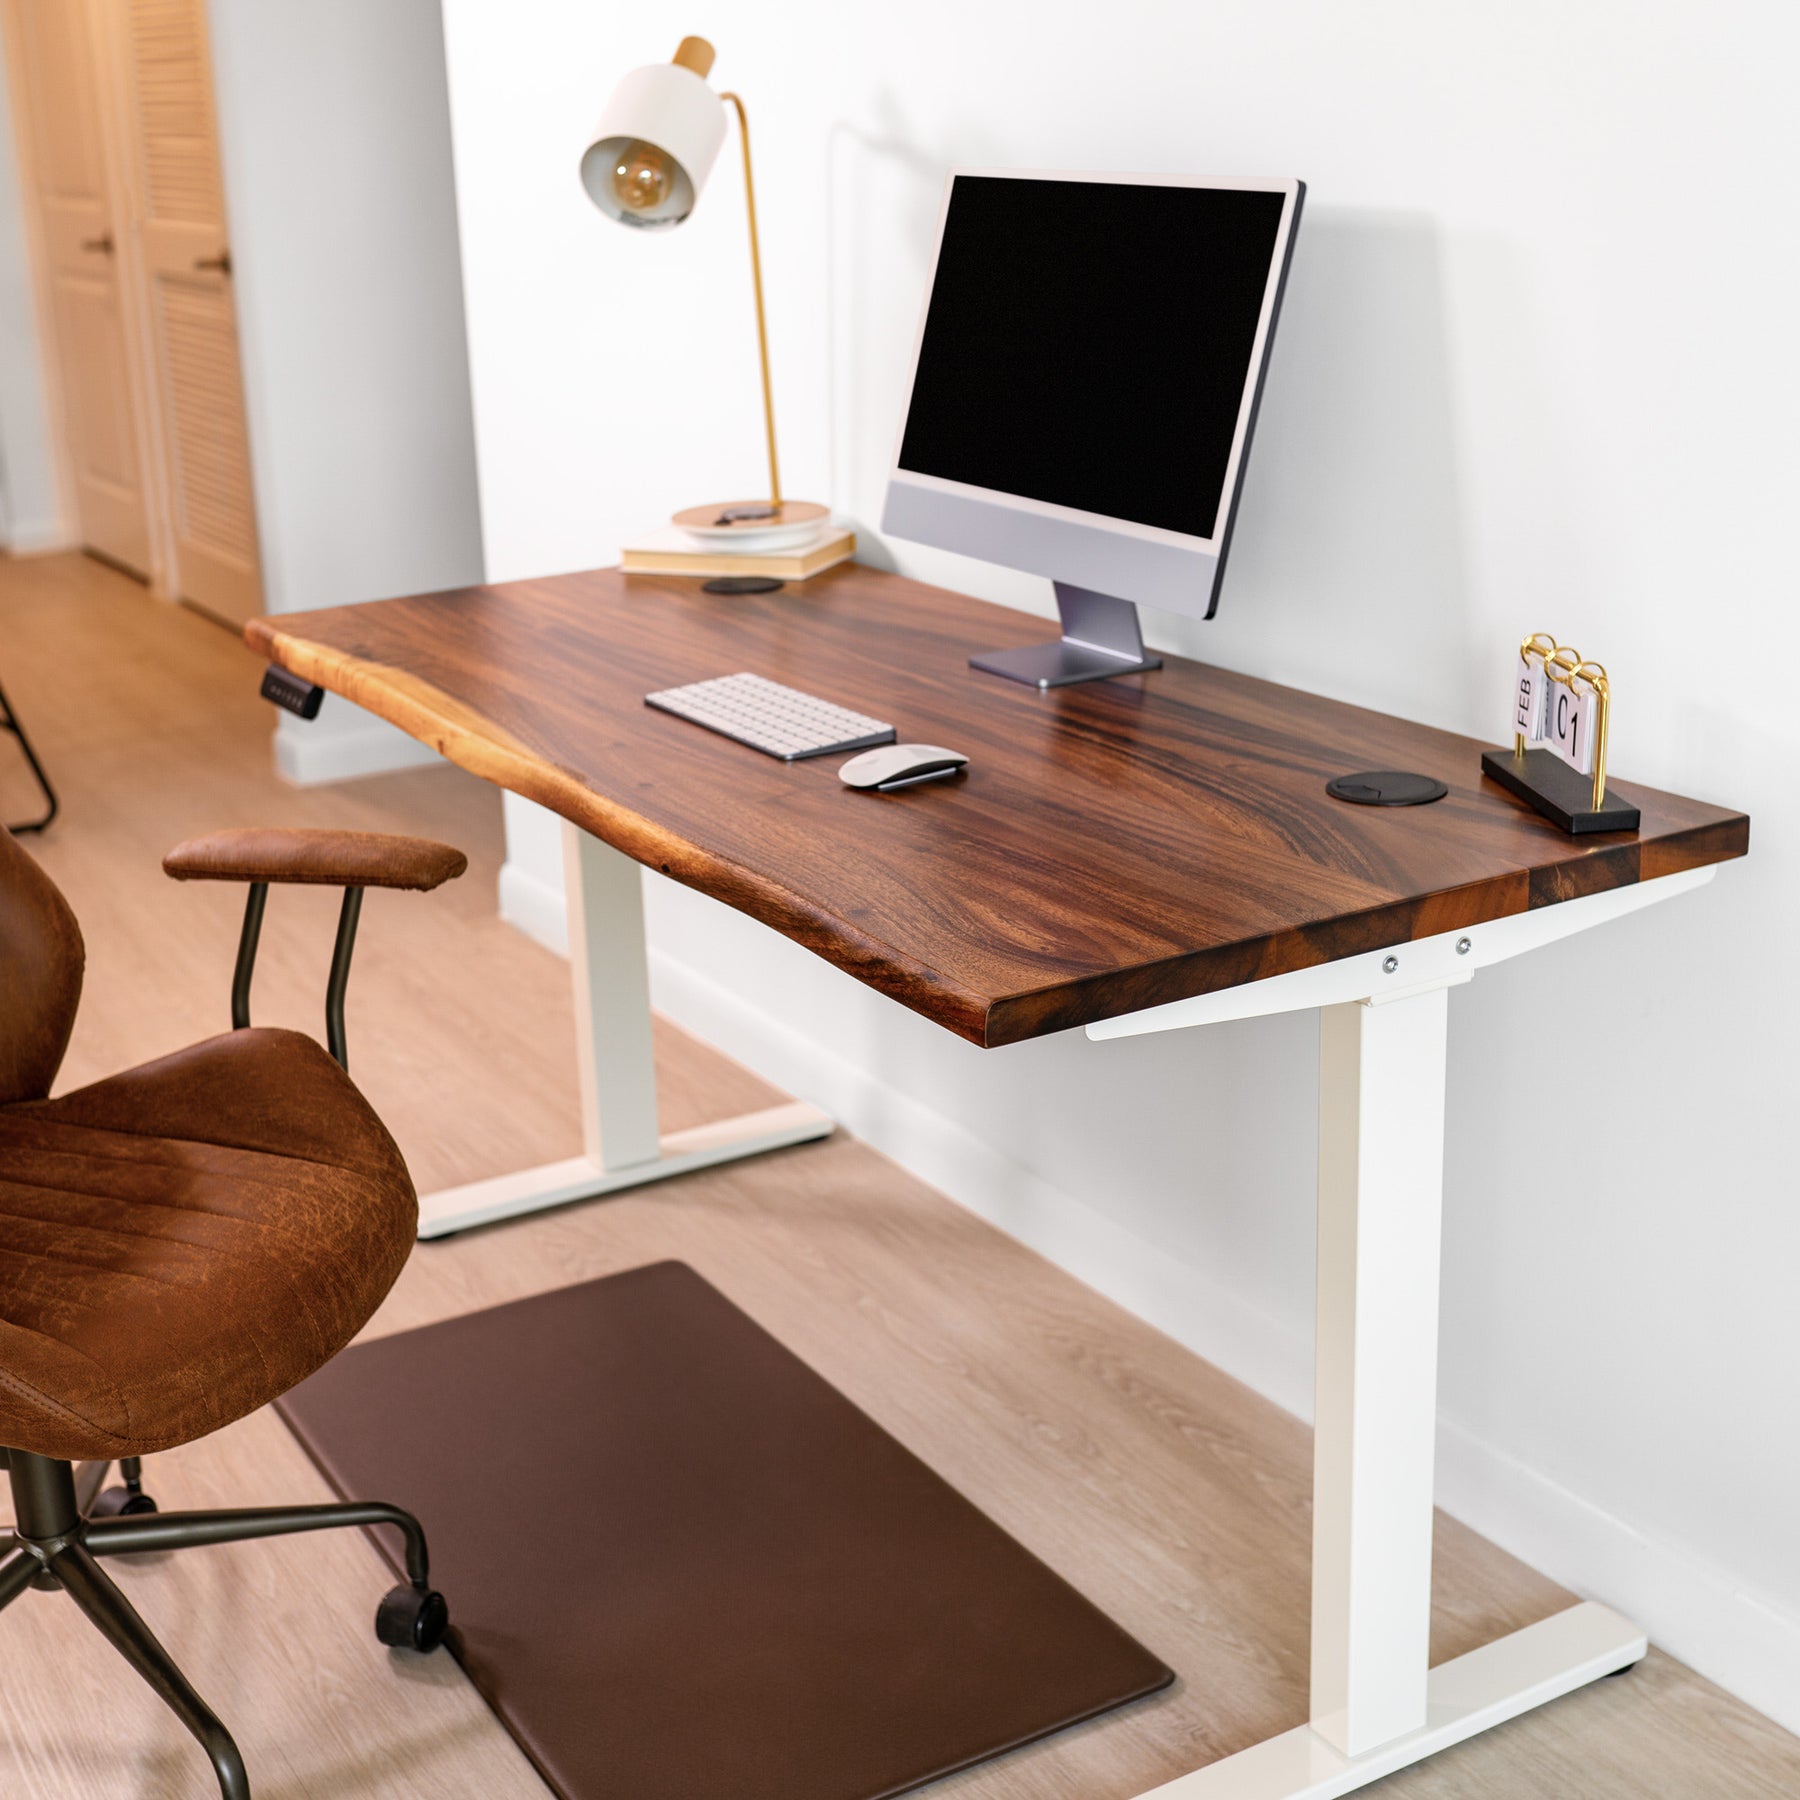 Adjustable standing desk with walnut wood, natural live edge top, and white dual motor legs.